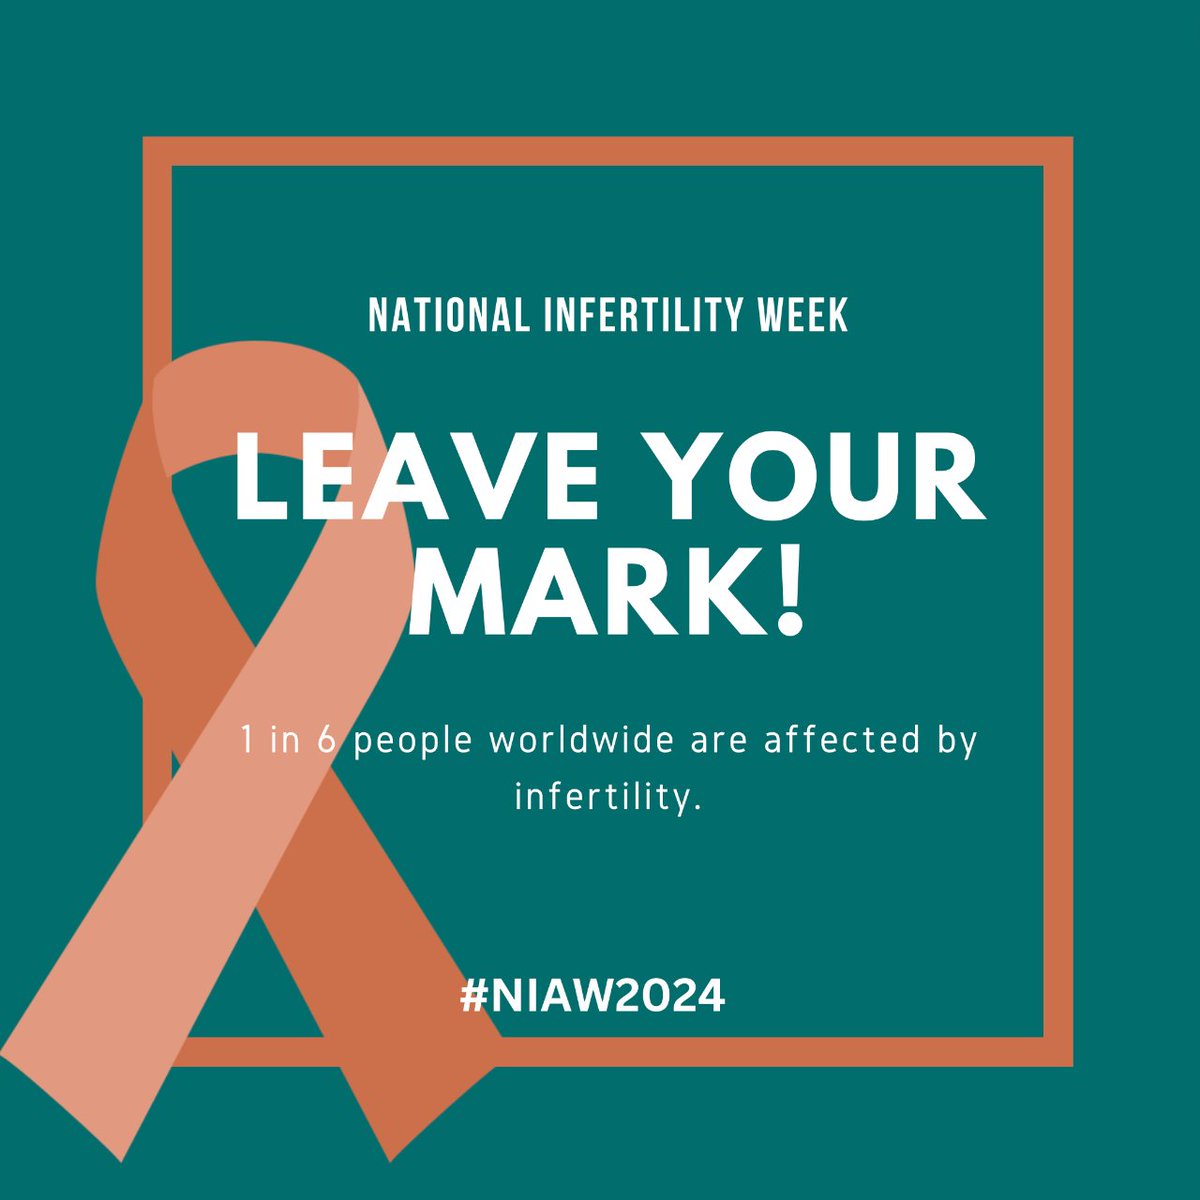 Worldwide face infertility challenges, including LGBTQ+ couples and single parents. Assisted reproductive treatments are essential for many to start families. Let's raise awareness during NIAW to highlight this important issue. #NIAW #HealthcareEquality